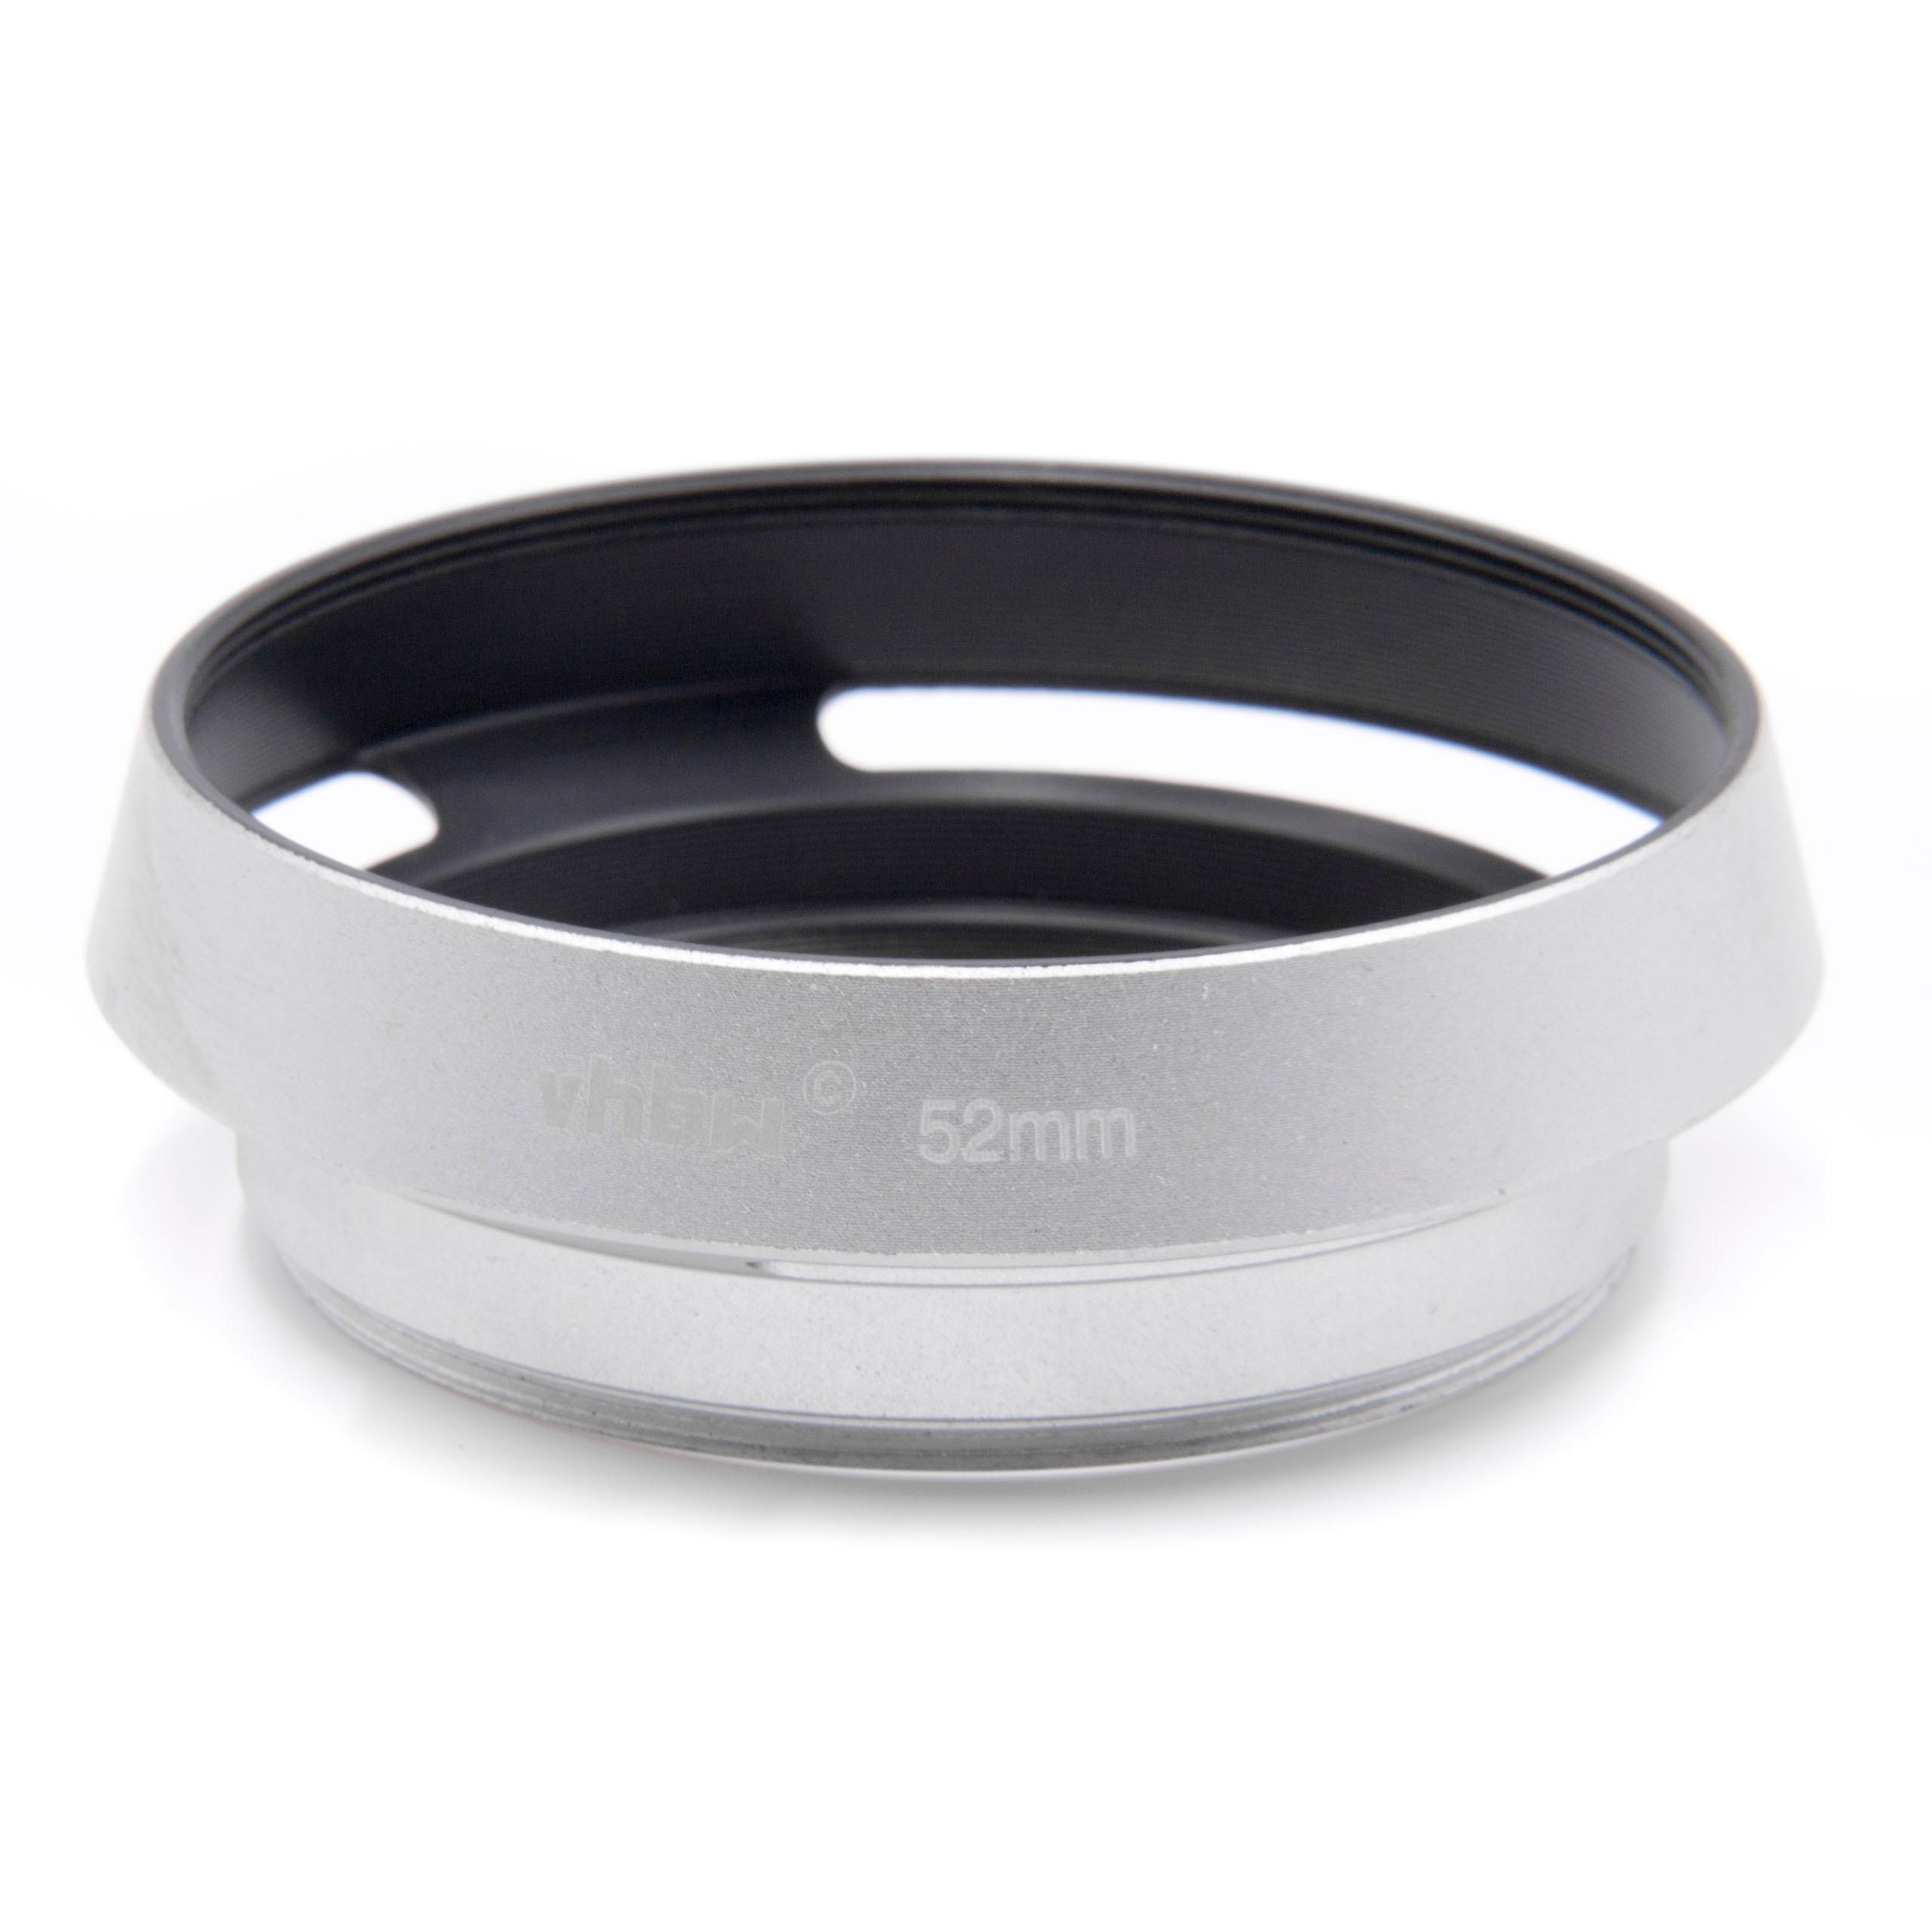 Lens Hood suitable for 52mm Lens - Lens Shade Silver, Round